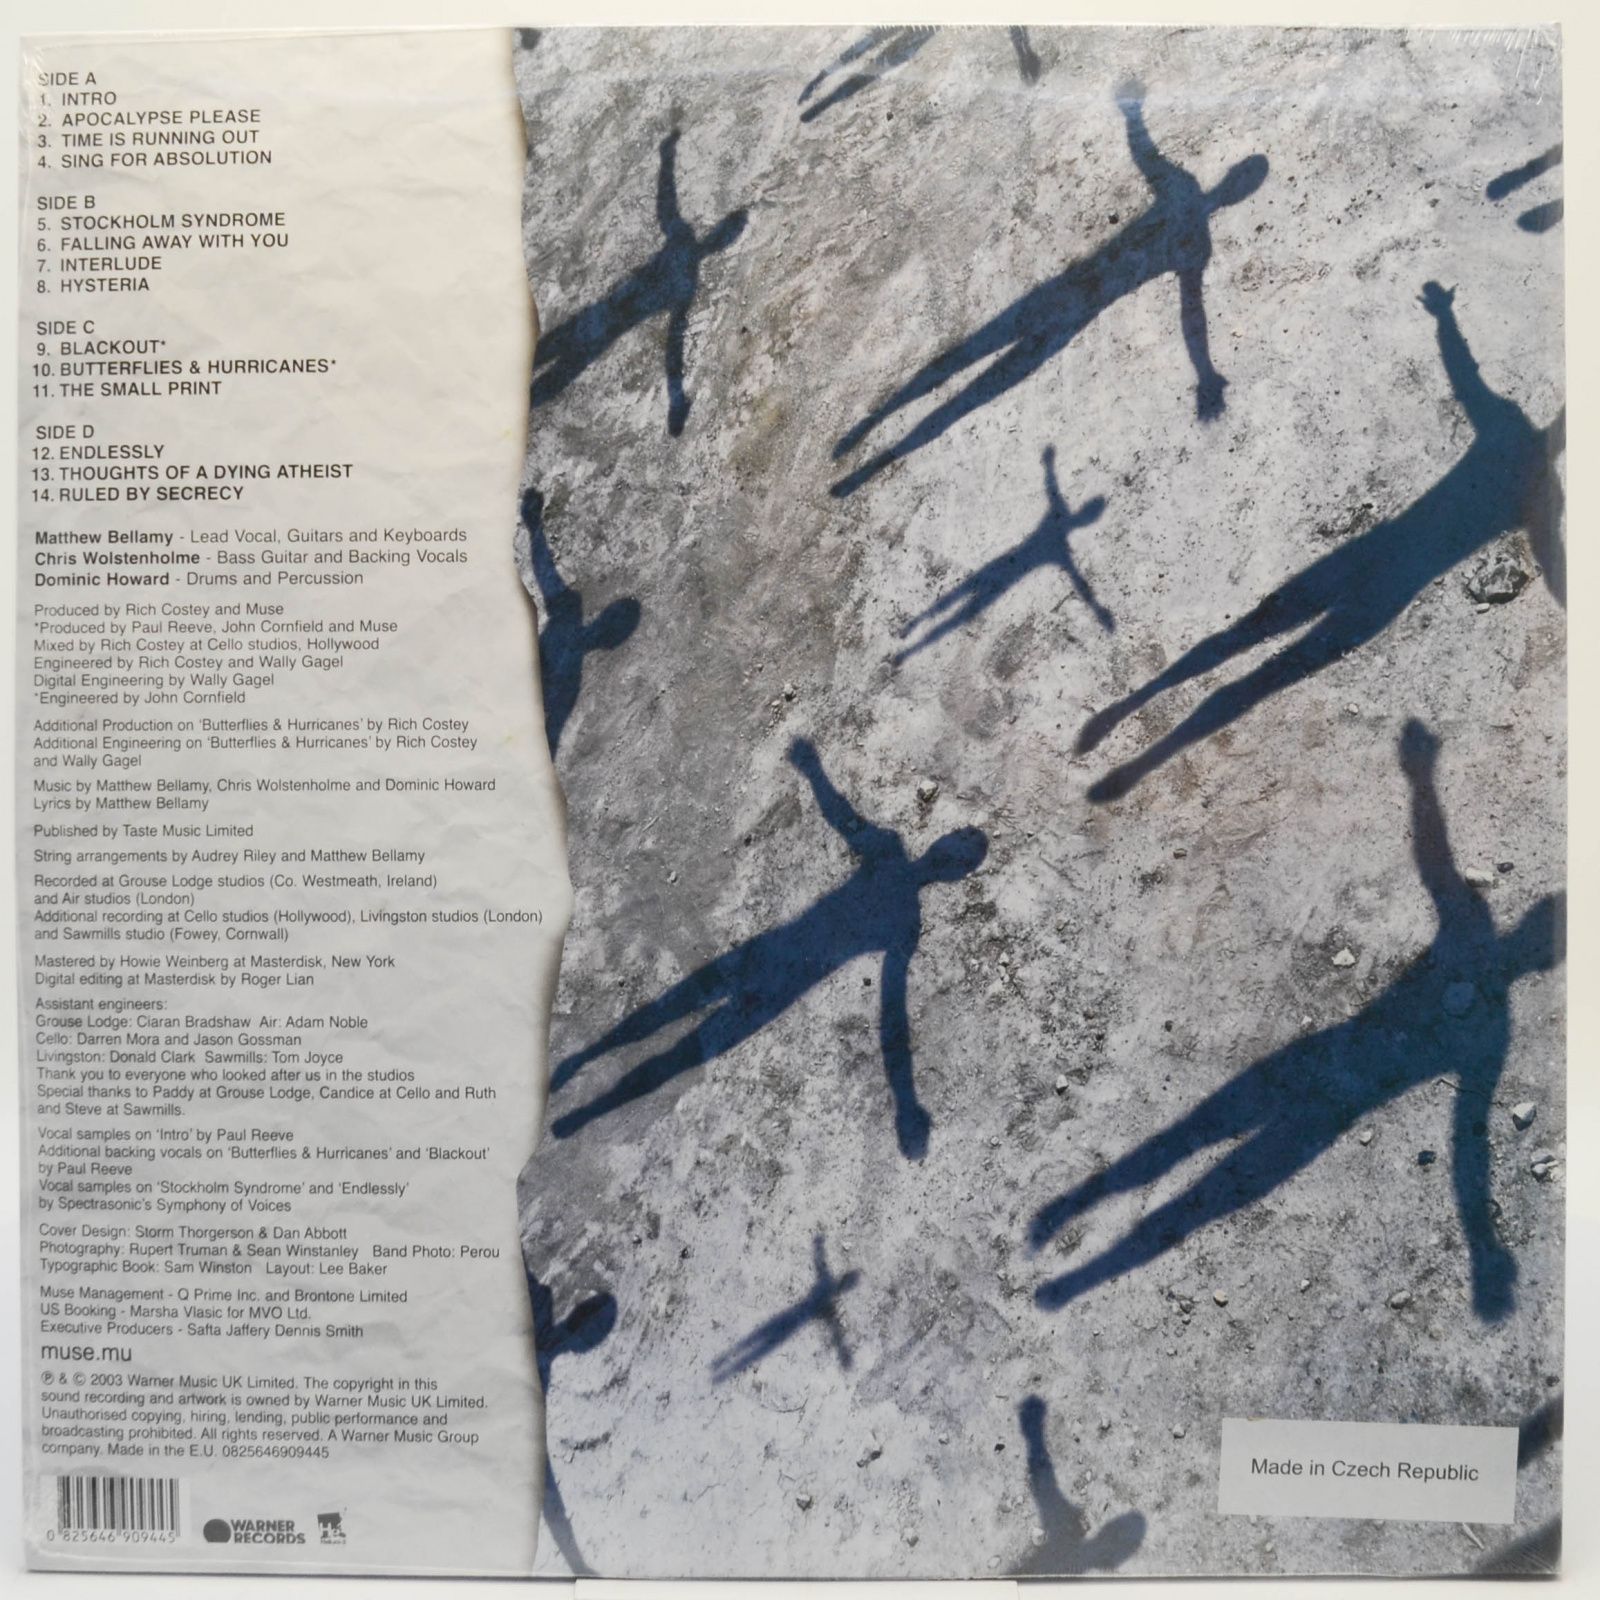 Muse — Absolution (2LP), 2003